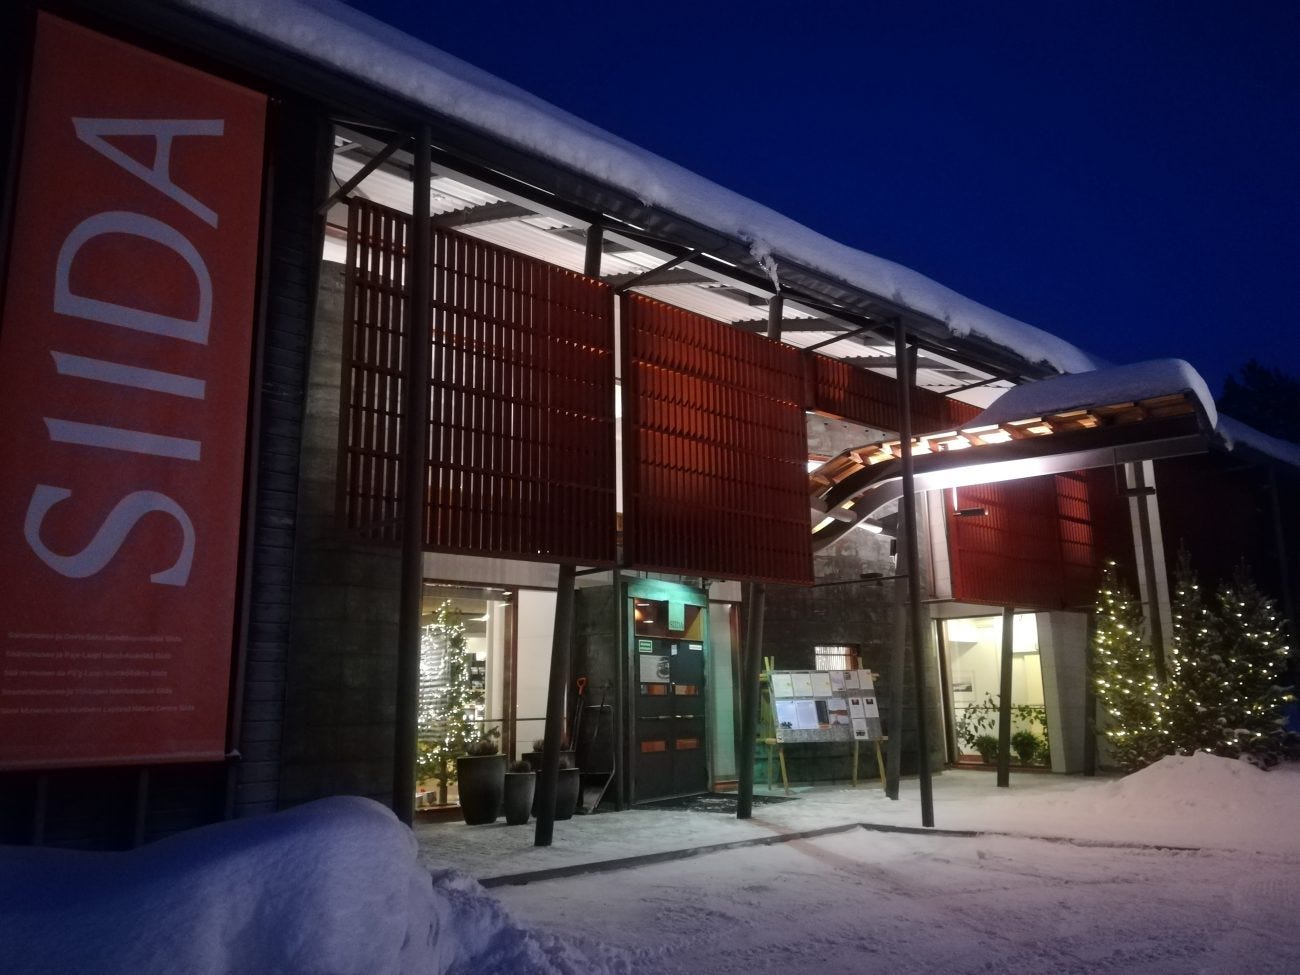 Sámi Museum Siida gets an important grant from Finnish Cultural Foundation  – Siida